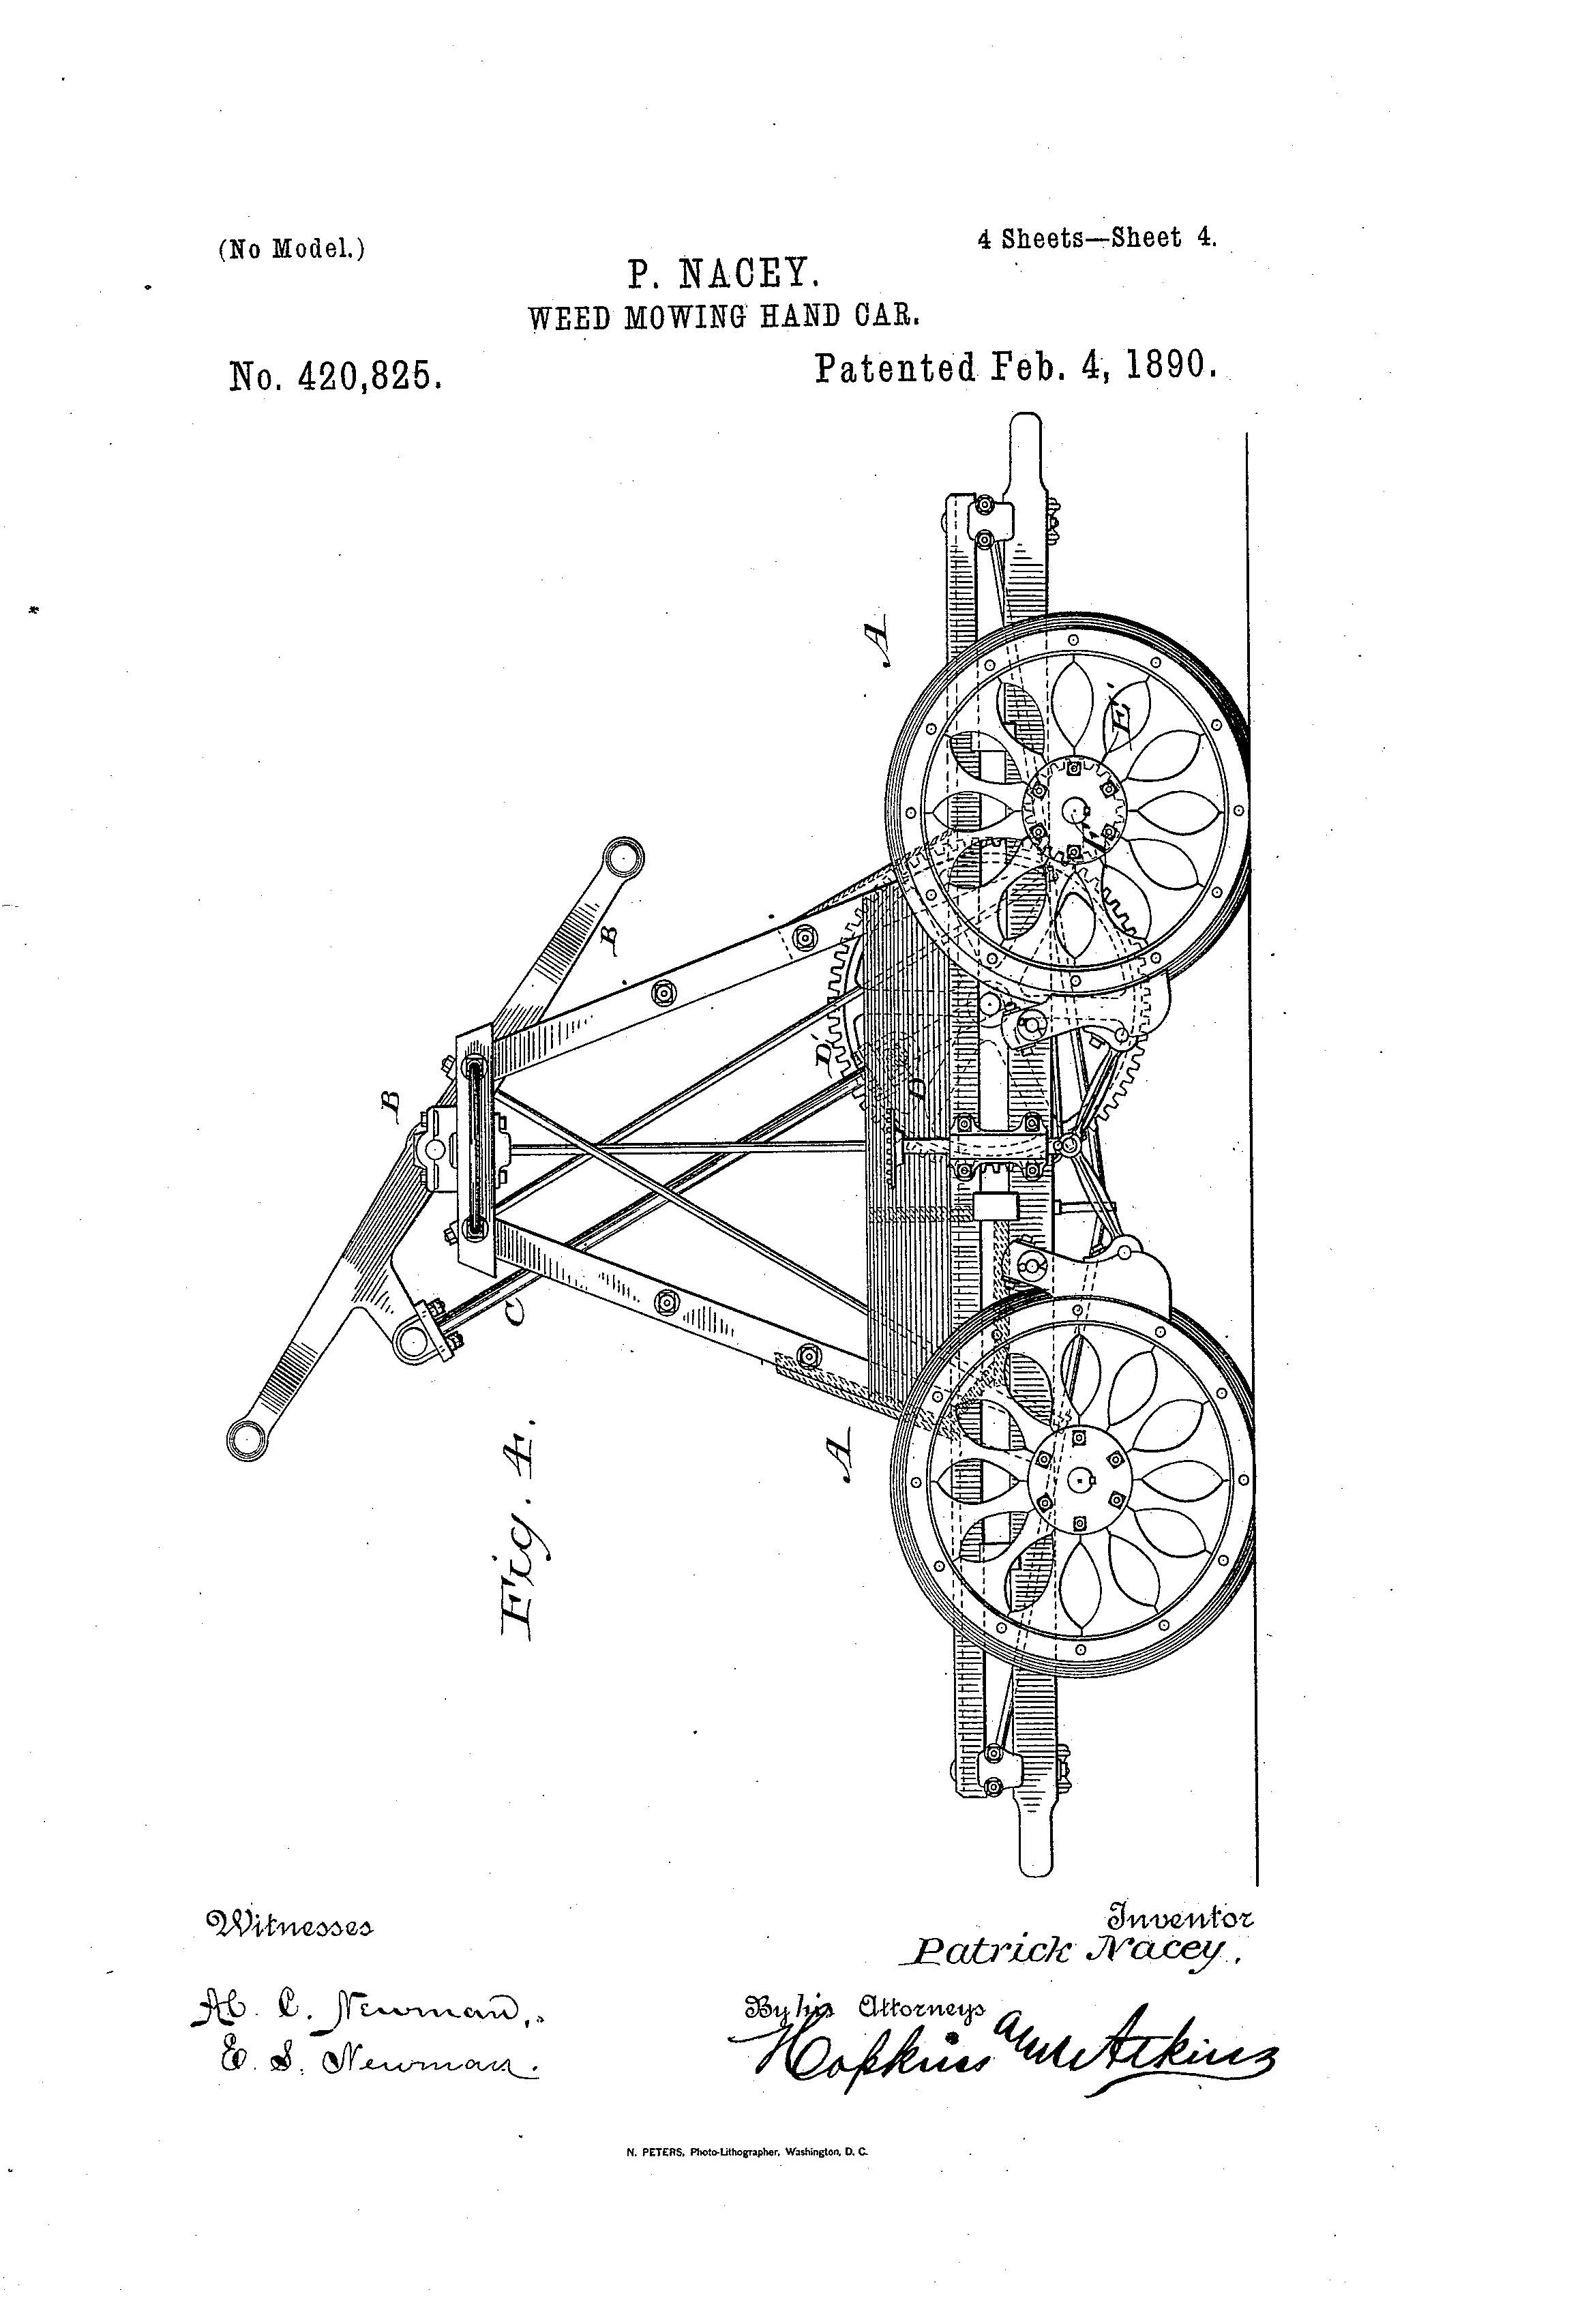 Patent-Illustration_Weed-Mowing-Hand-Car_Page_4